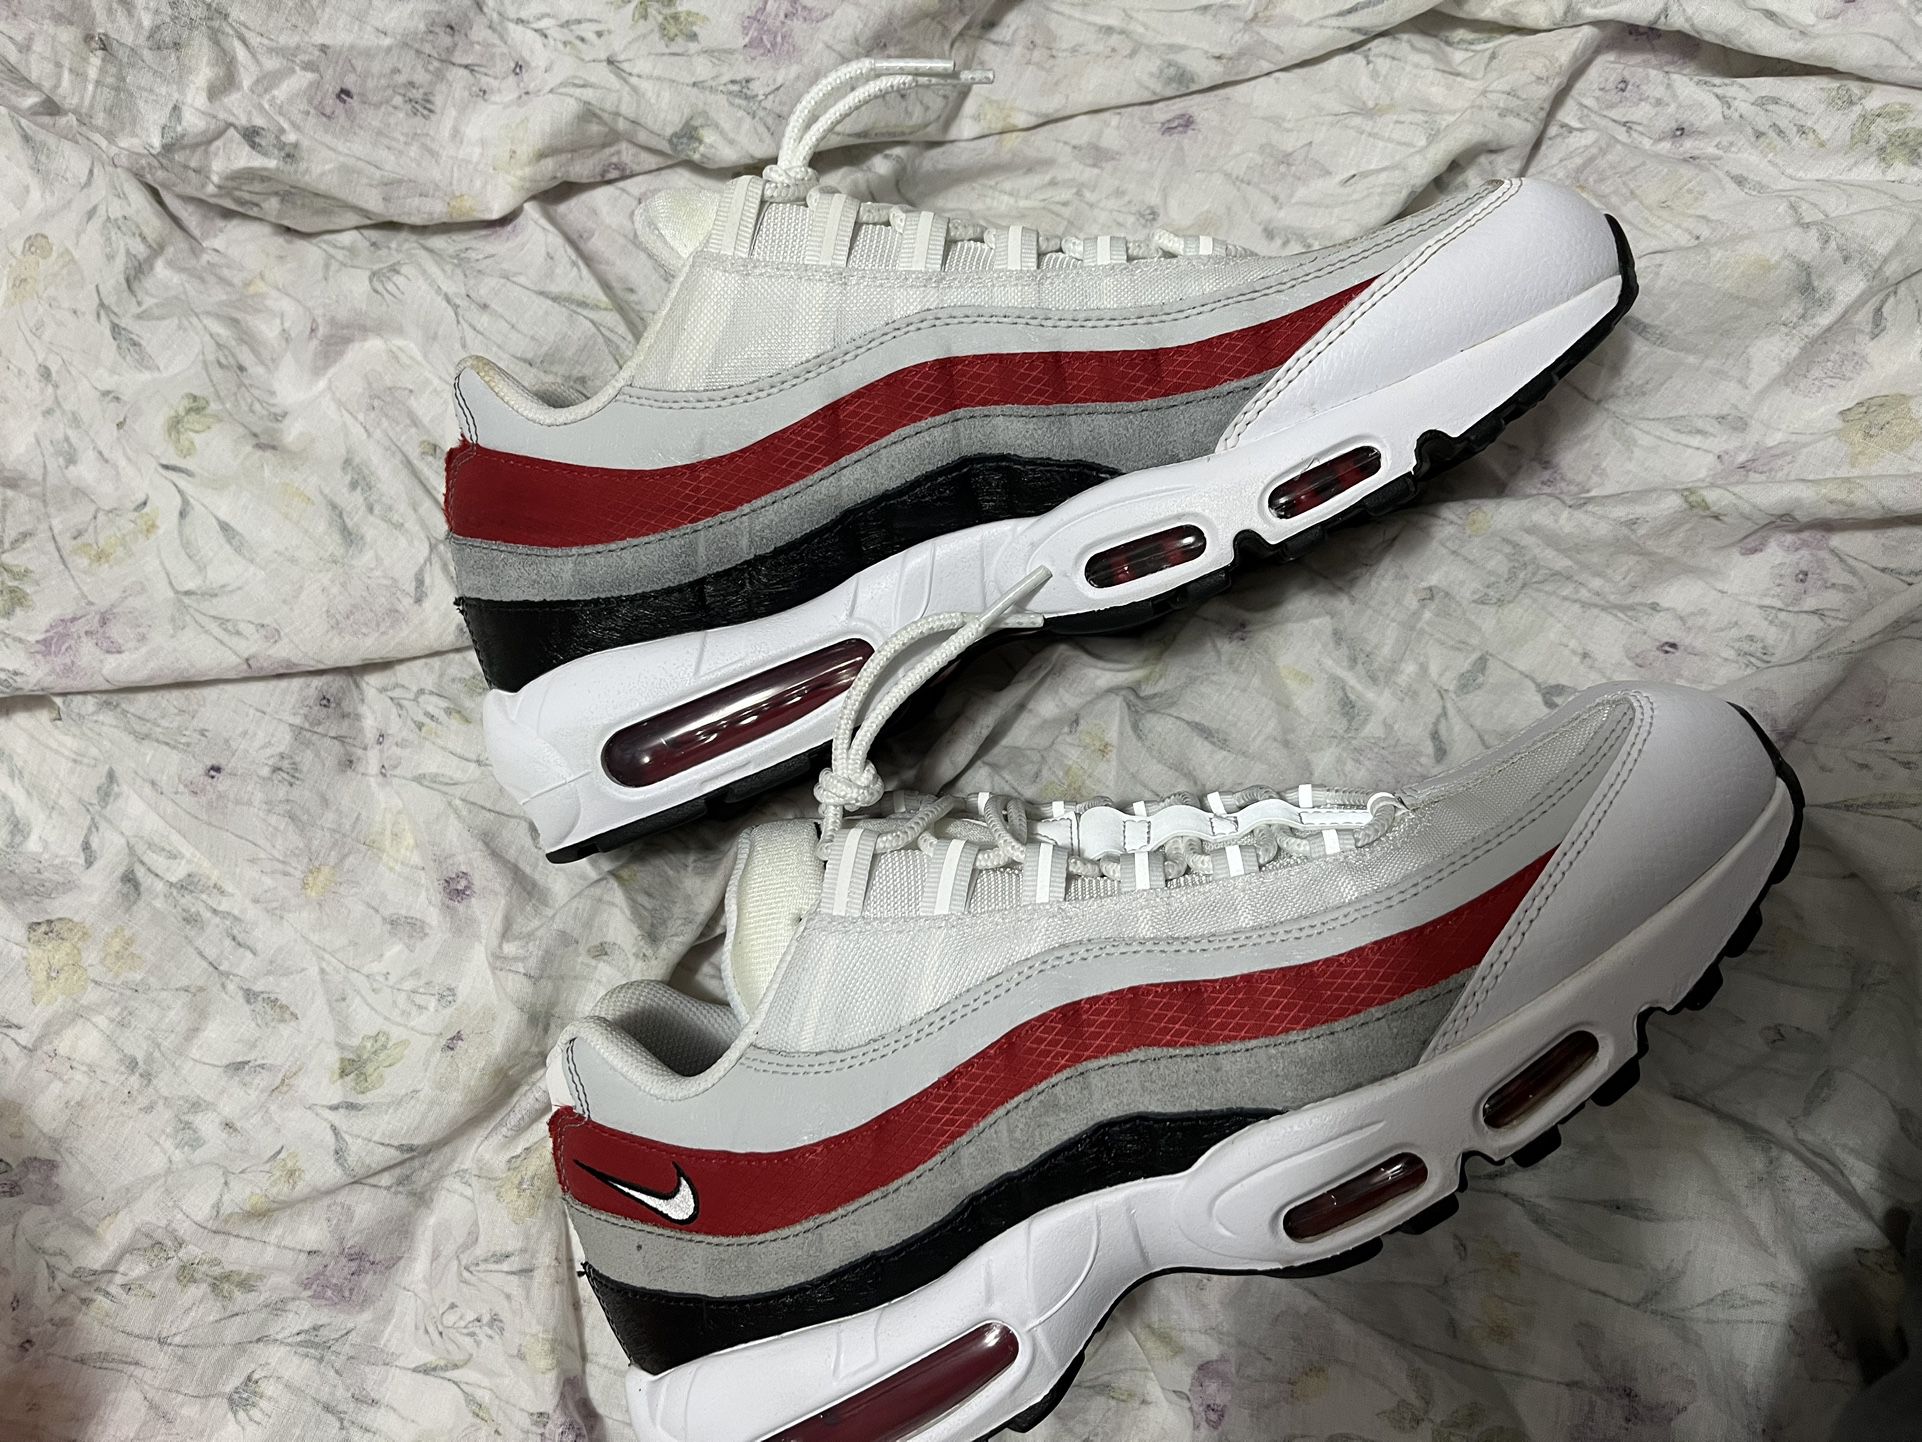 Nike Air Max 95s Size 12